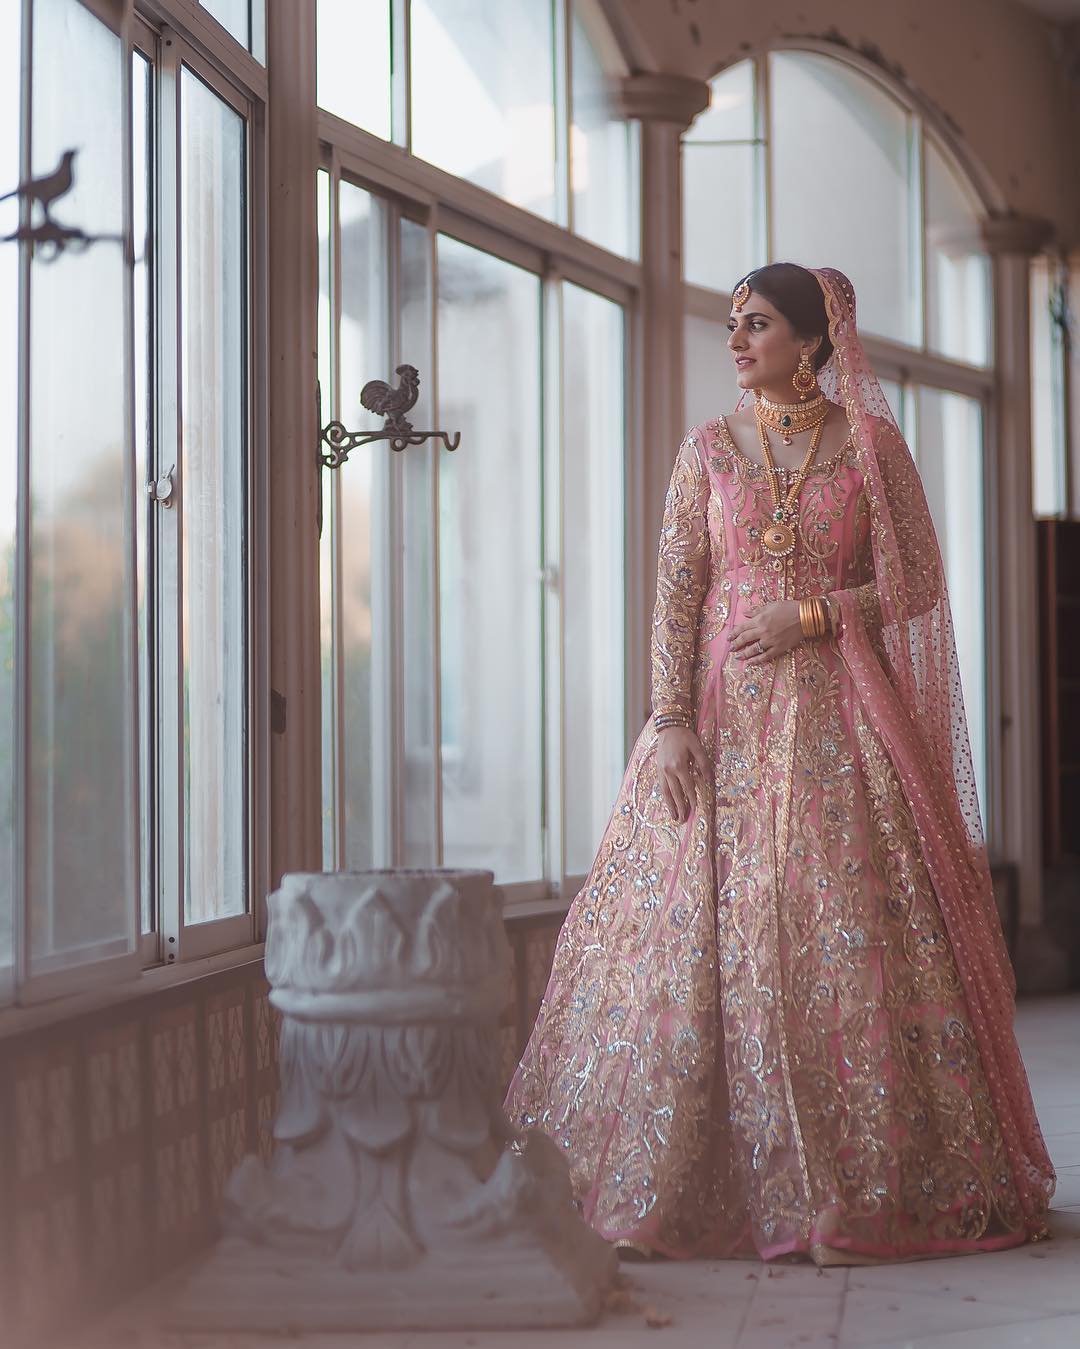 The Magical Anecdotes Of Beads & Sequins, As Told By The Modern Bride